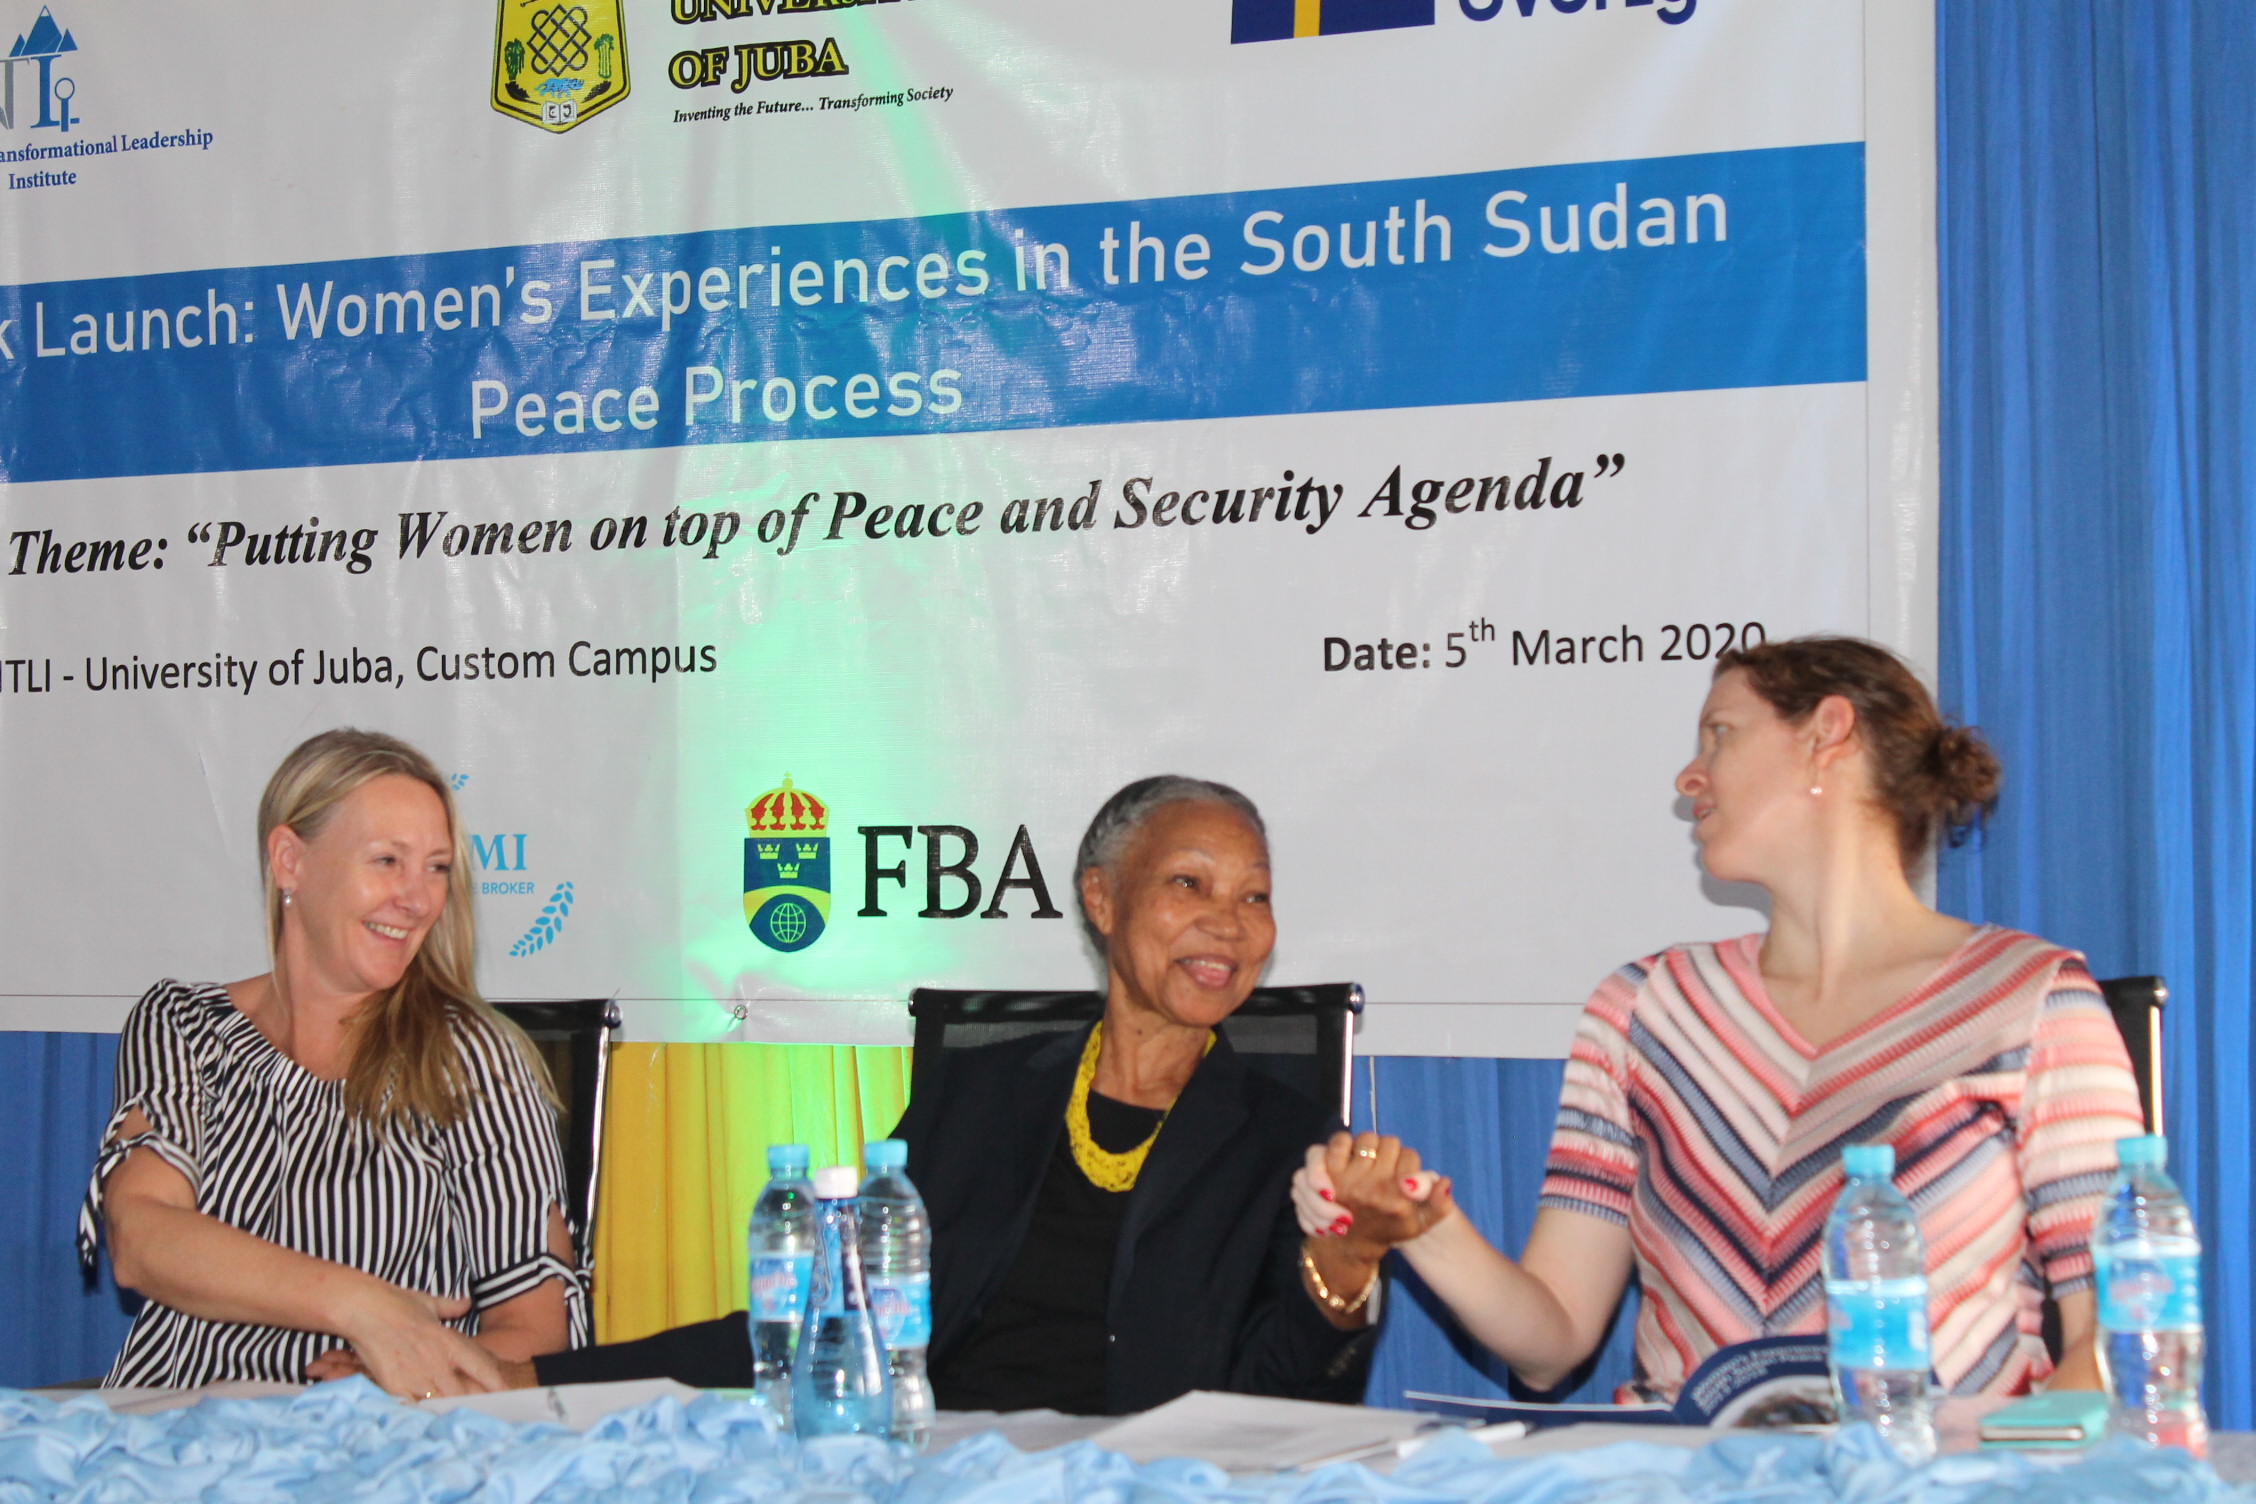 NTLI Launches book on Women’s Experiences in South Sudan’s Peace Processes